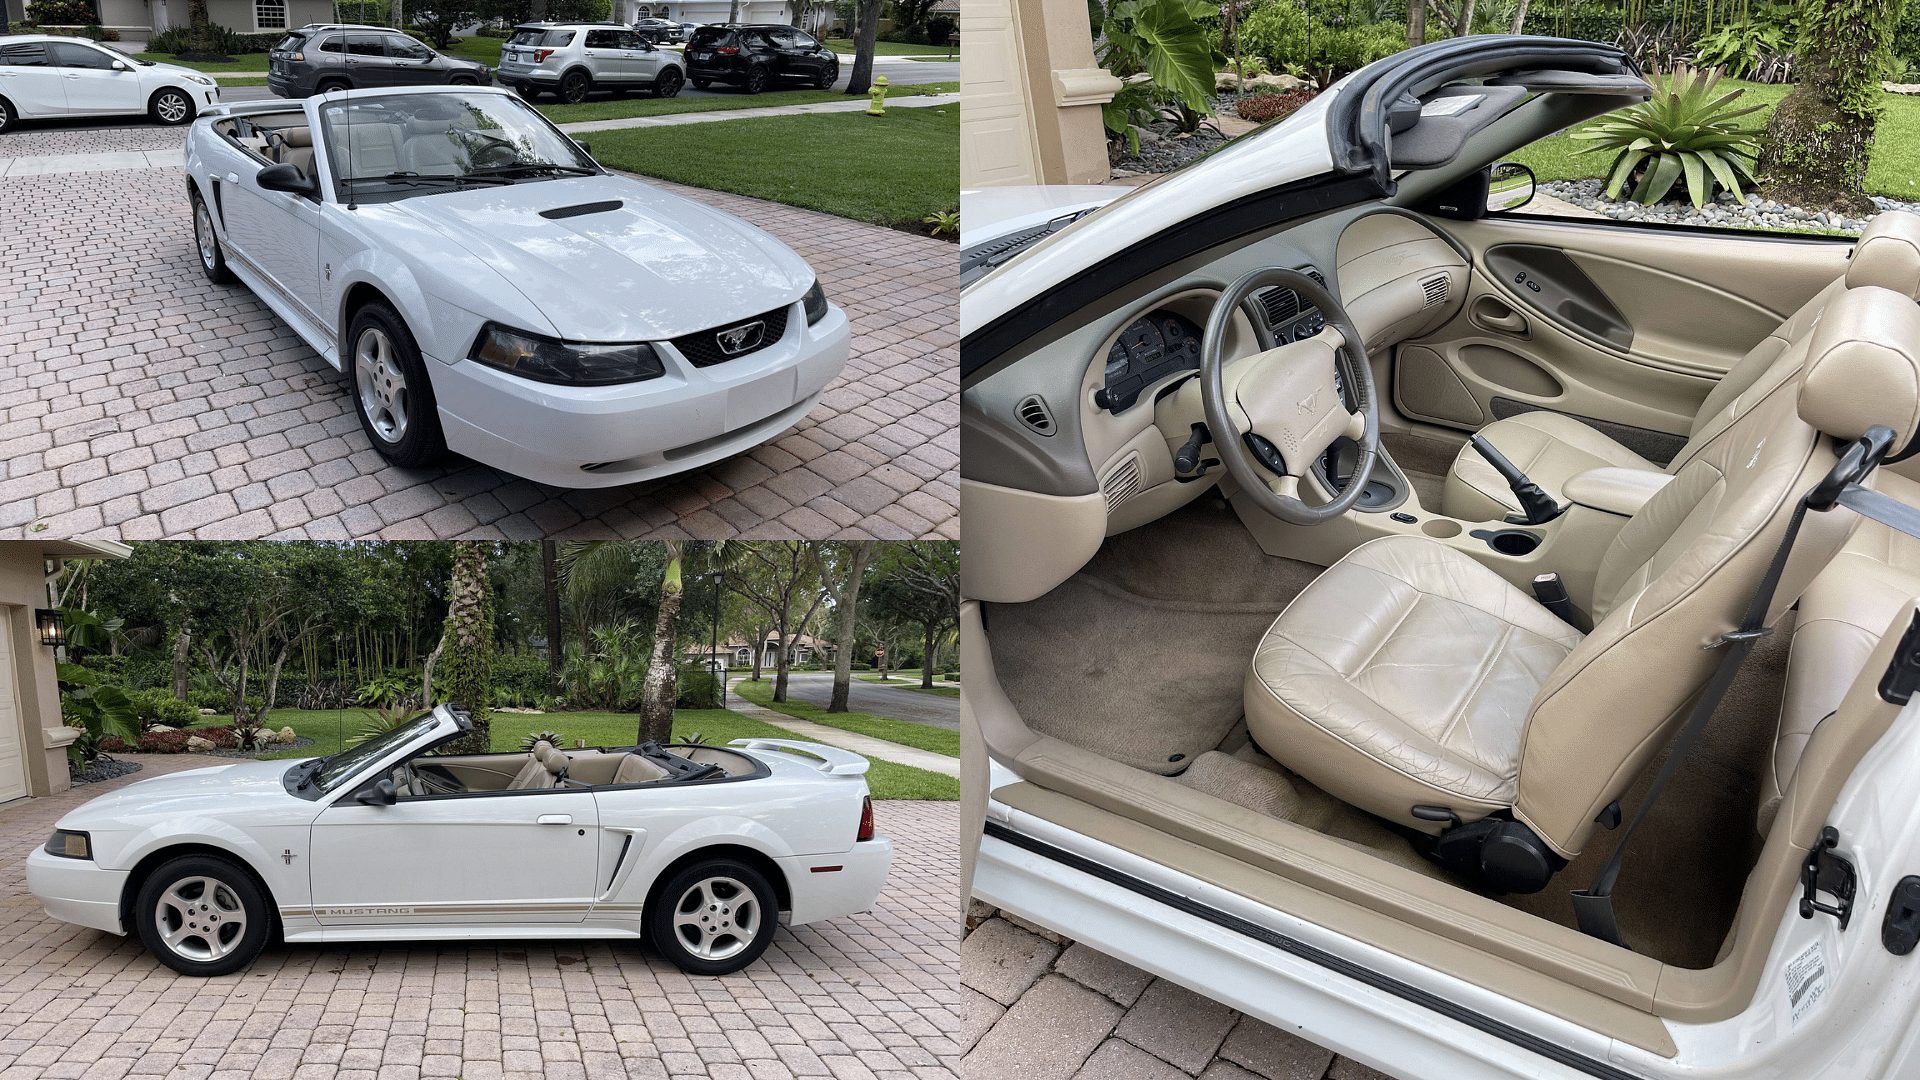 2002 Ford Mustang Convertible - front and side view, interior